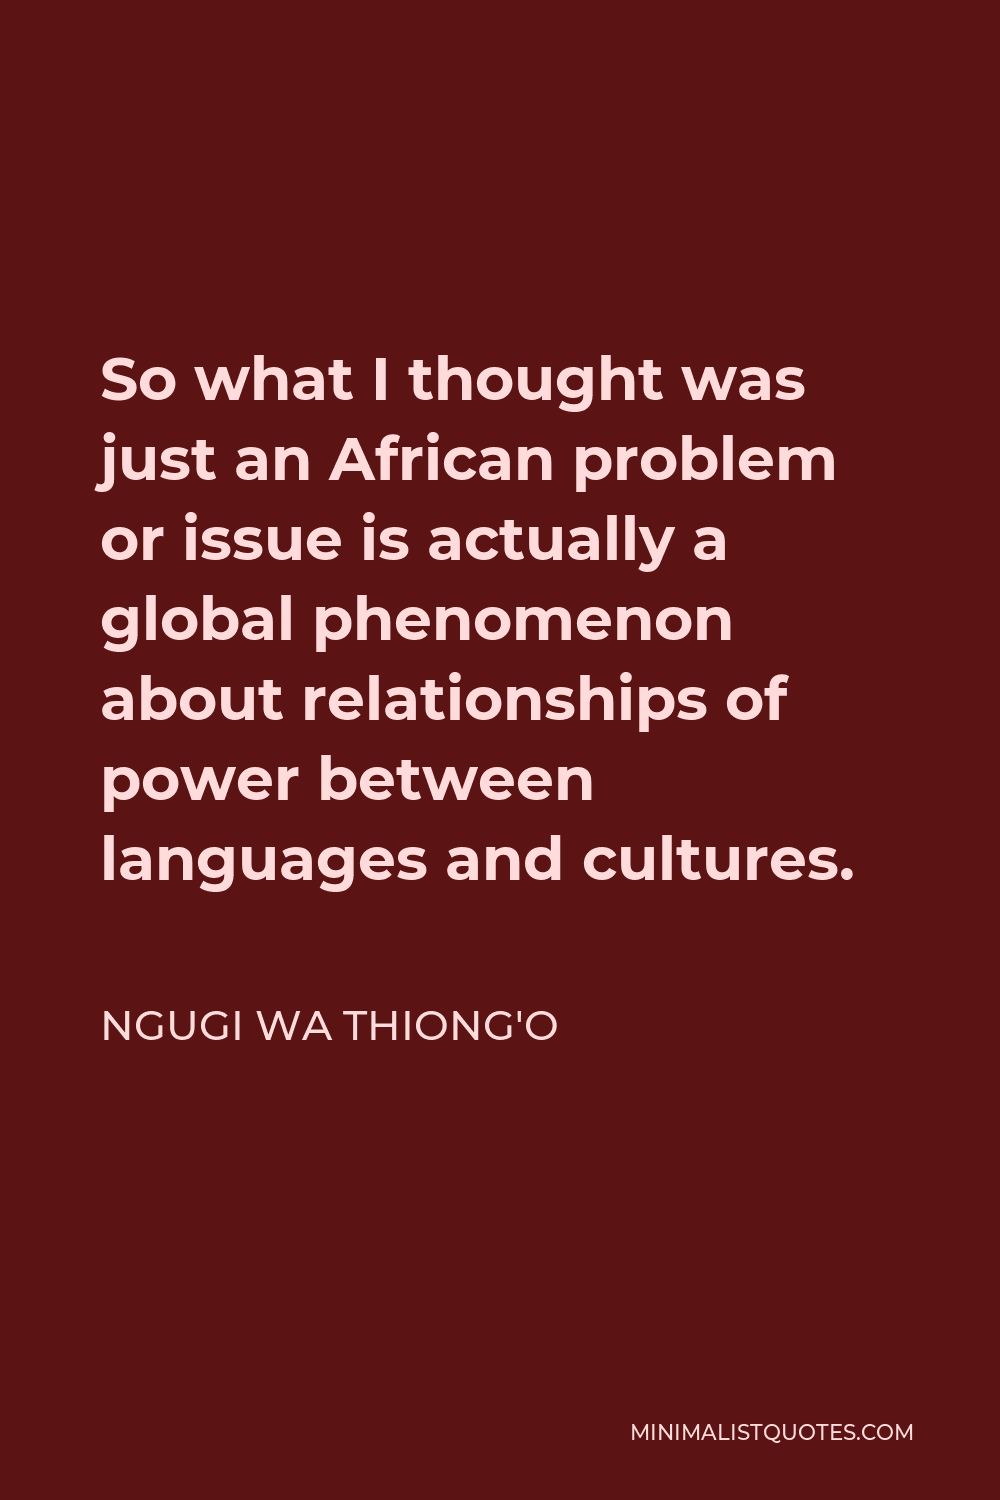 Ngugi wa Thiong'o Quote - So what I thought was just an African problem or issue is actually a global phenomenon about relationships of power between languages and cultures.